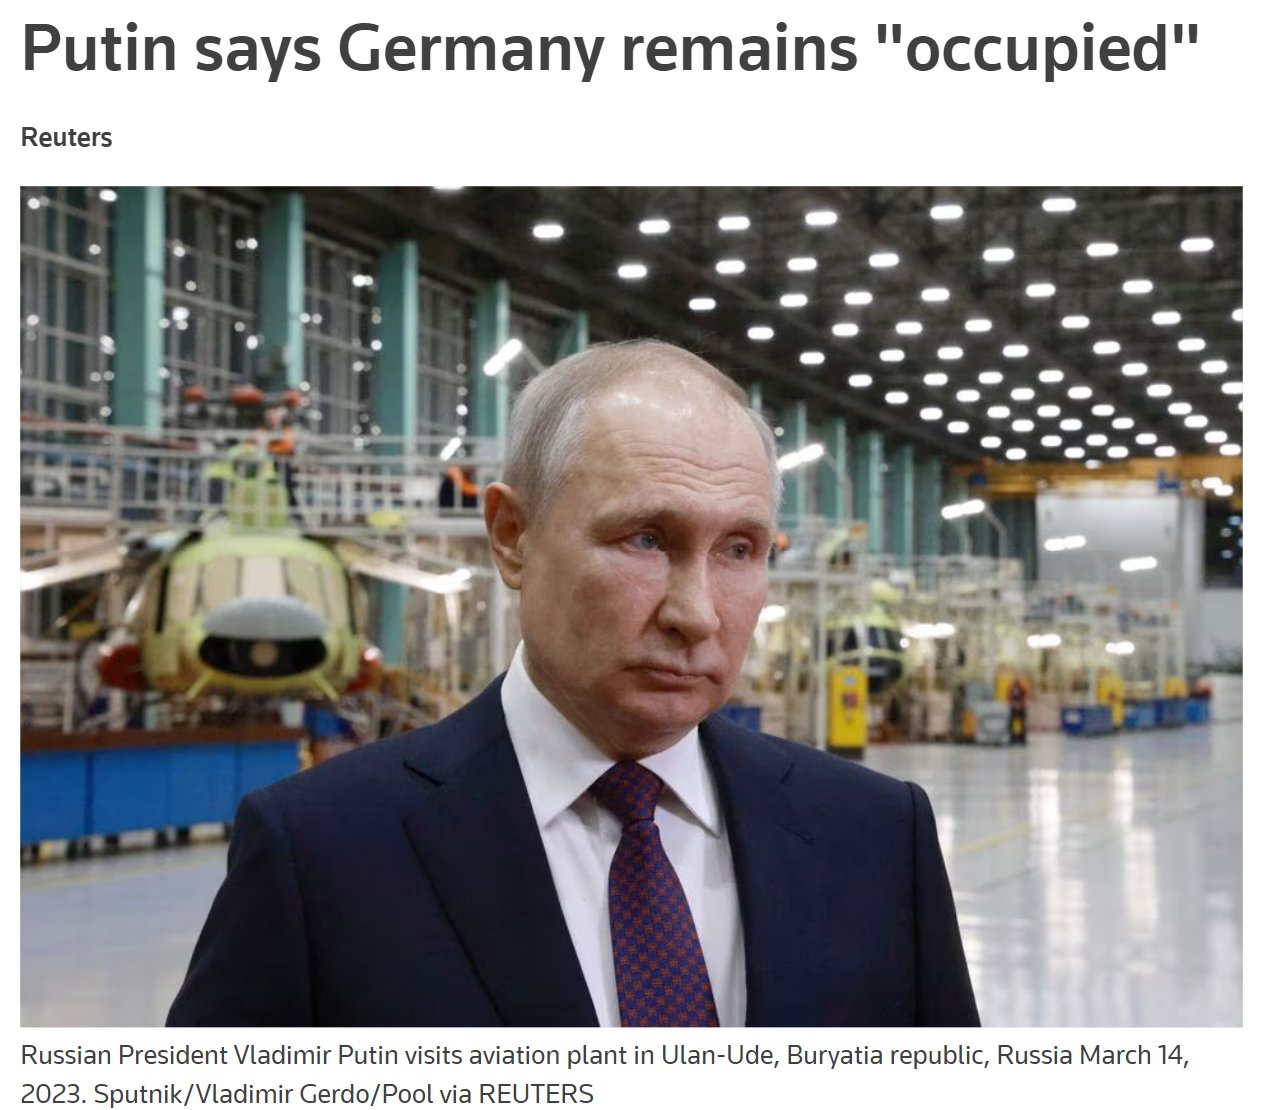 Putin says Germany remains ‘occupied’